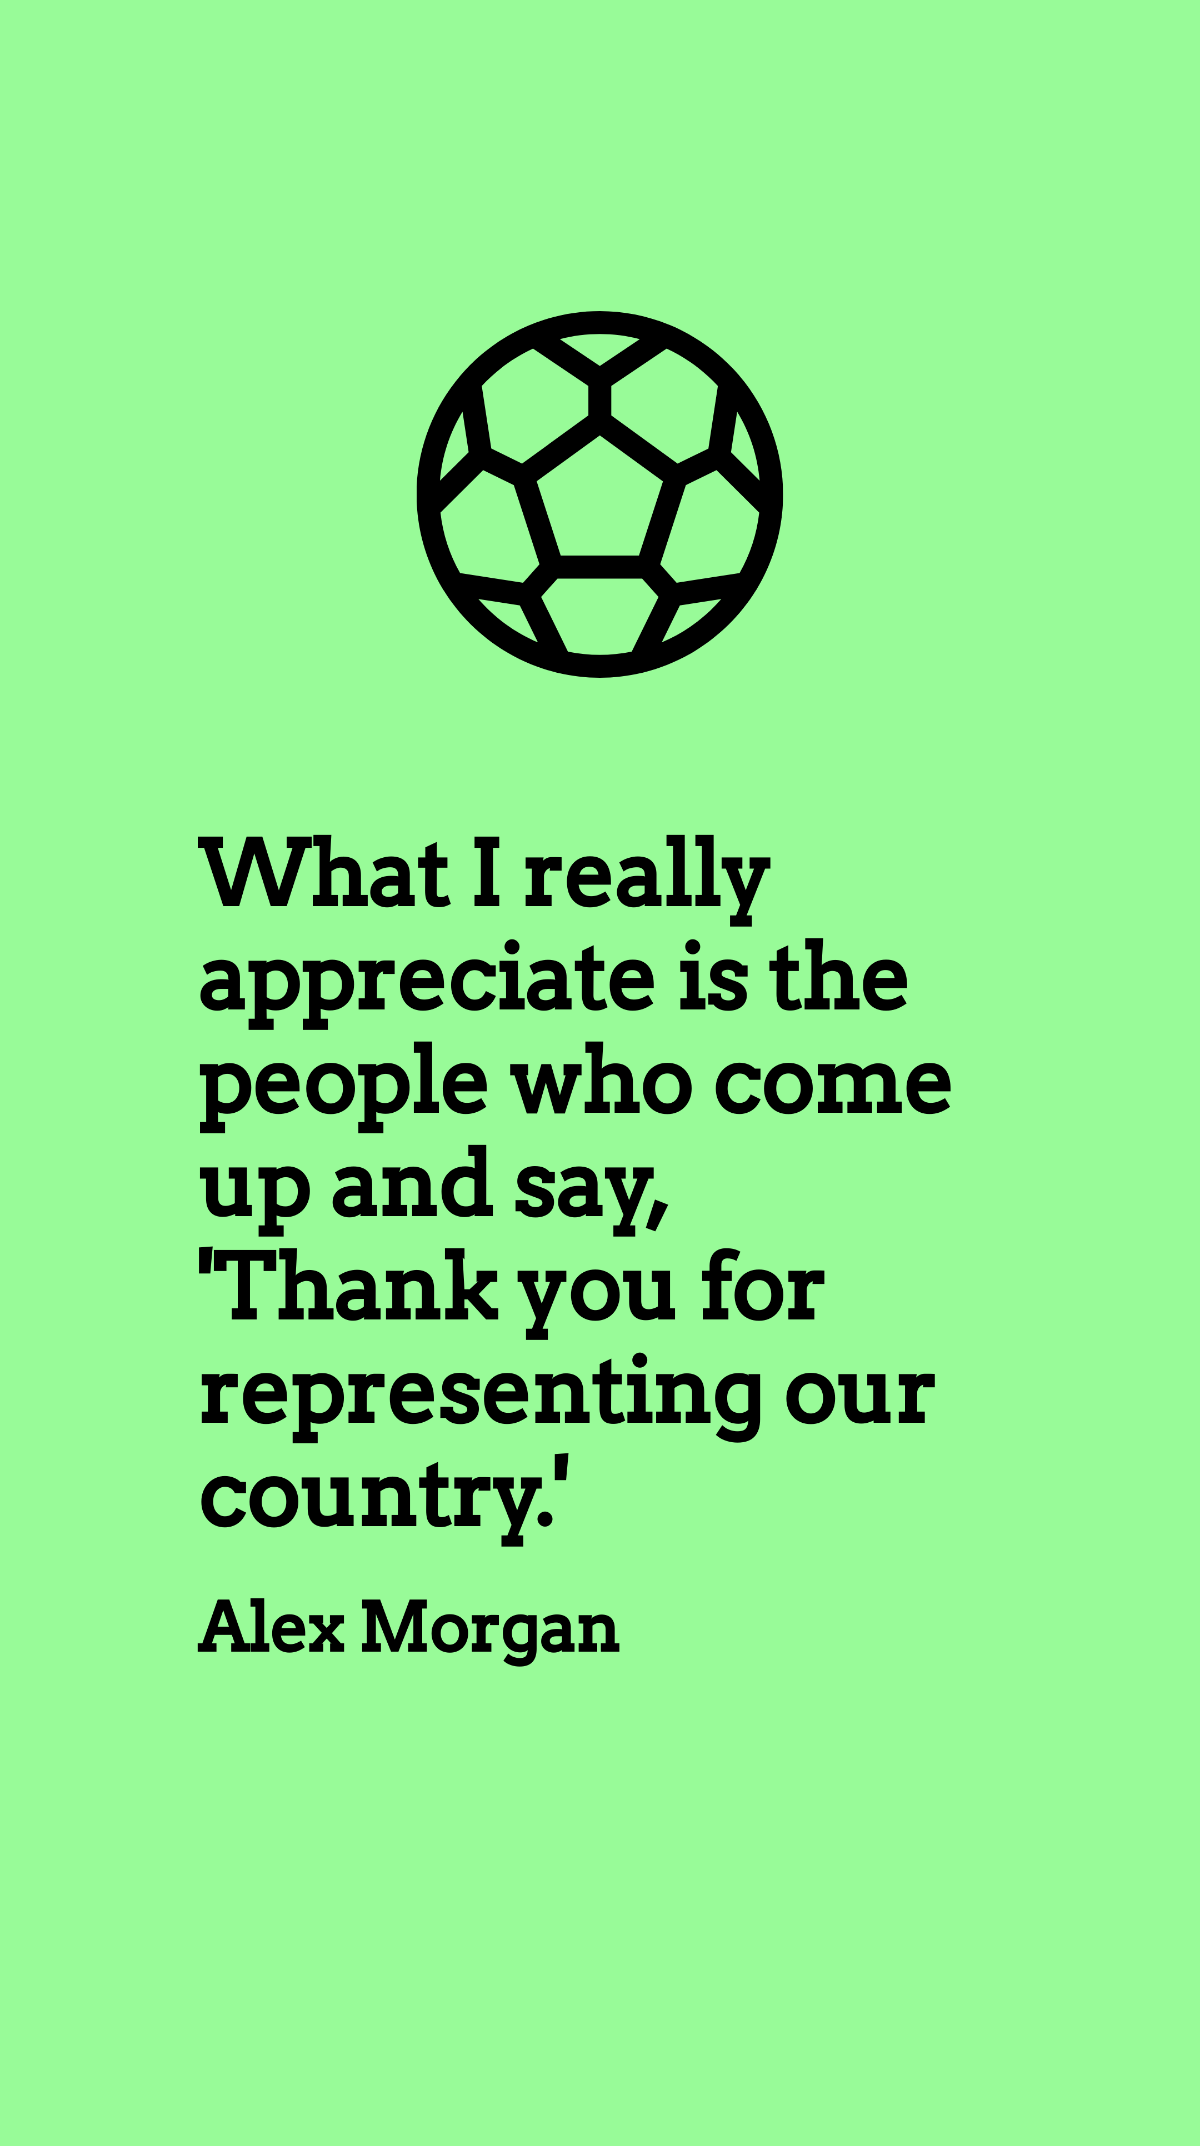 Free Alex Morgan - What I really appreciate is the people who come up and say, 'Thank you for representing our country.' Template